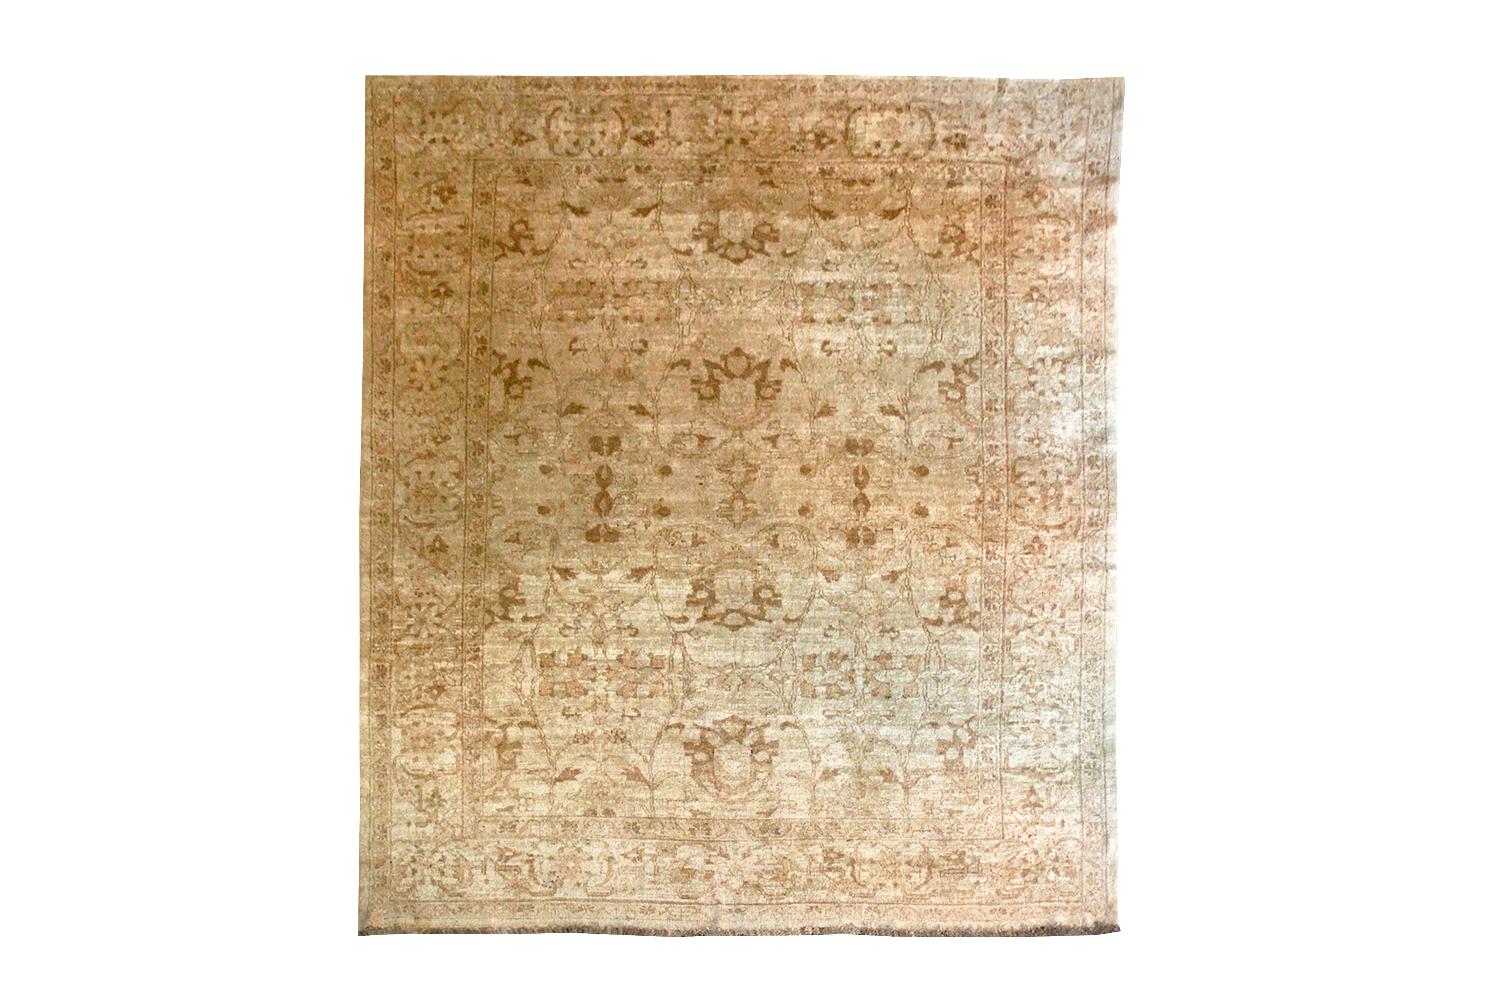 Vintage hand knotted wool rug in a tonal wheat, gold and brown overall pattern. Slightly longer than square, solid wool. Note the rug is photographed from both direction of the weft, to show the light and dark directions of the fibers. Measure: 8 x